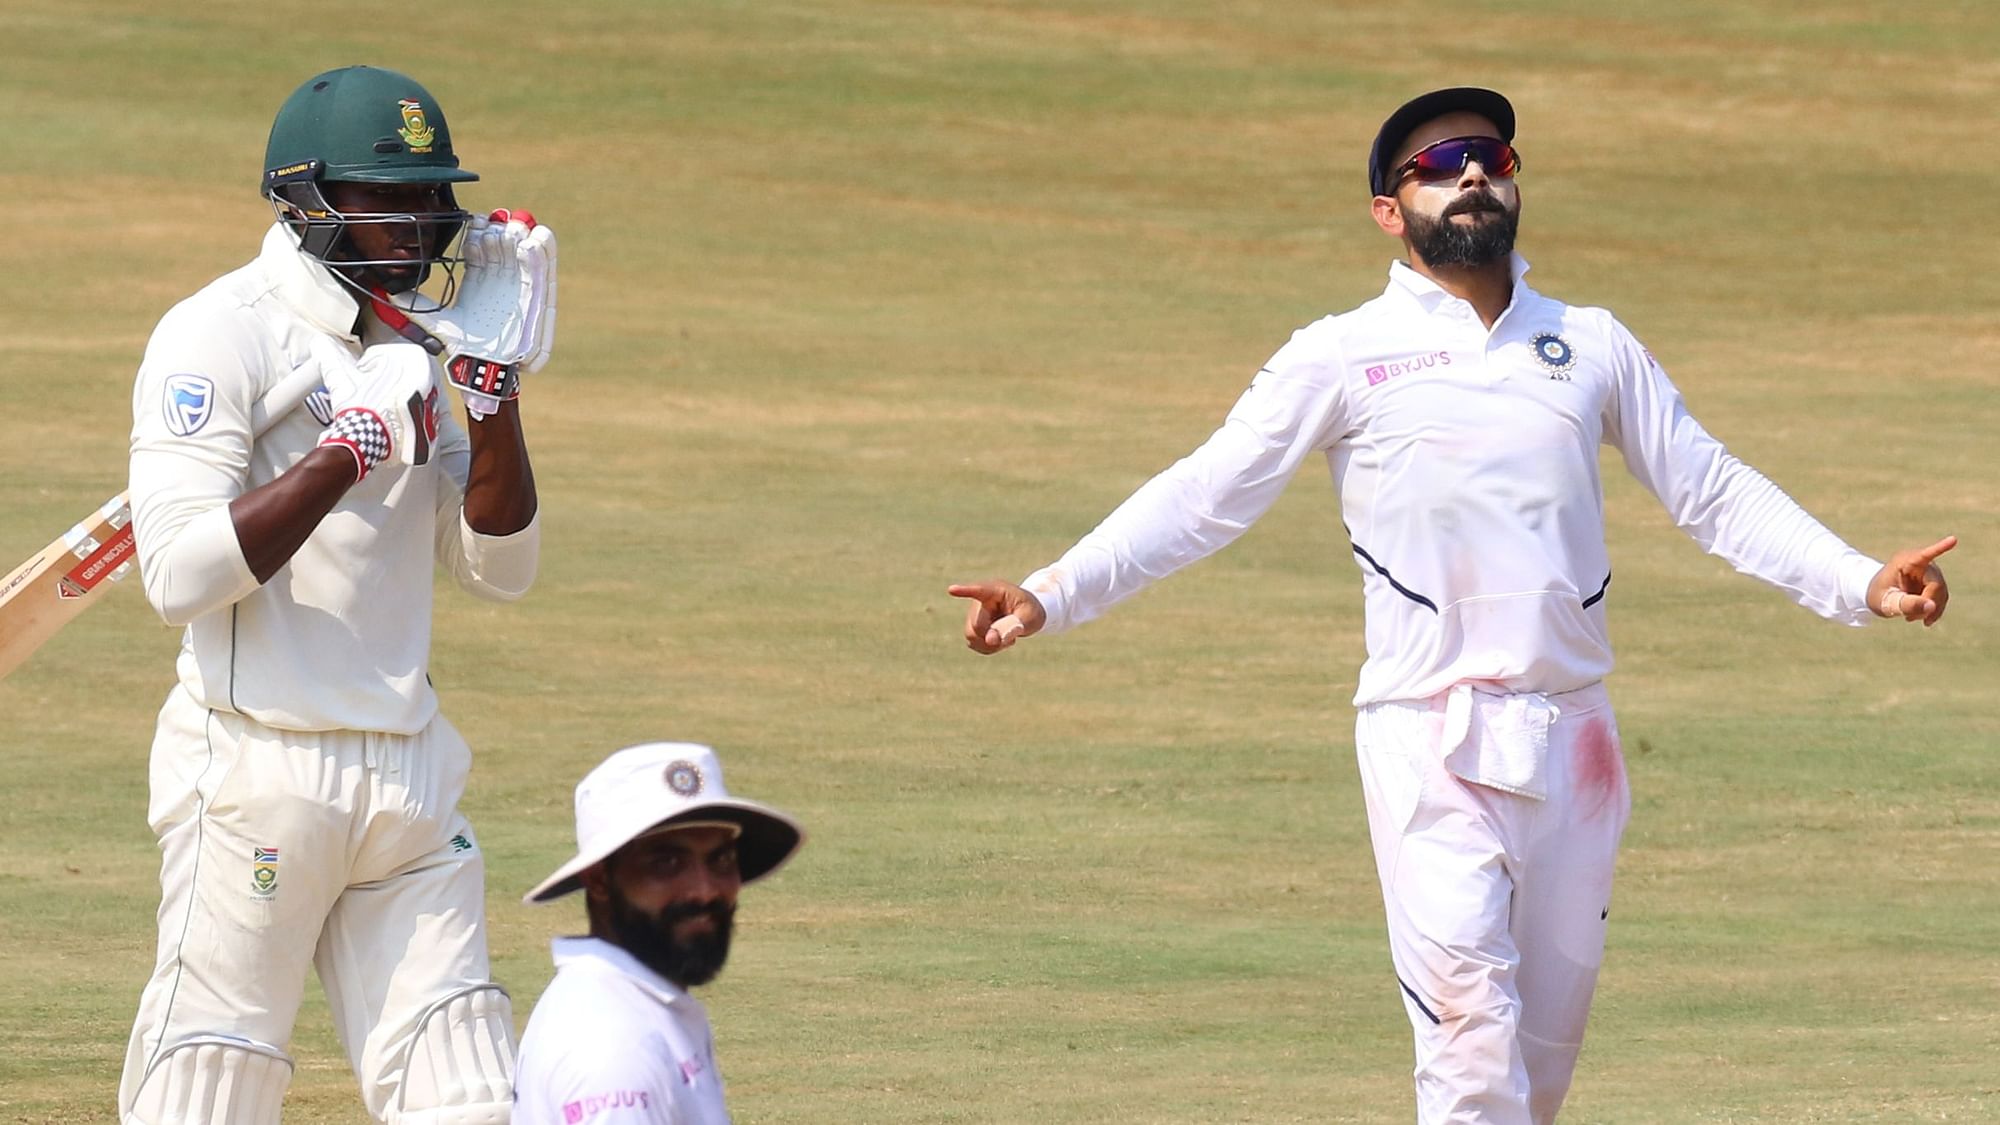 Virat Kohli celebrates after India’s win over South Africa in the Vizag Test.